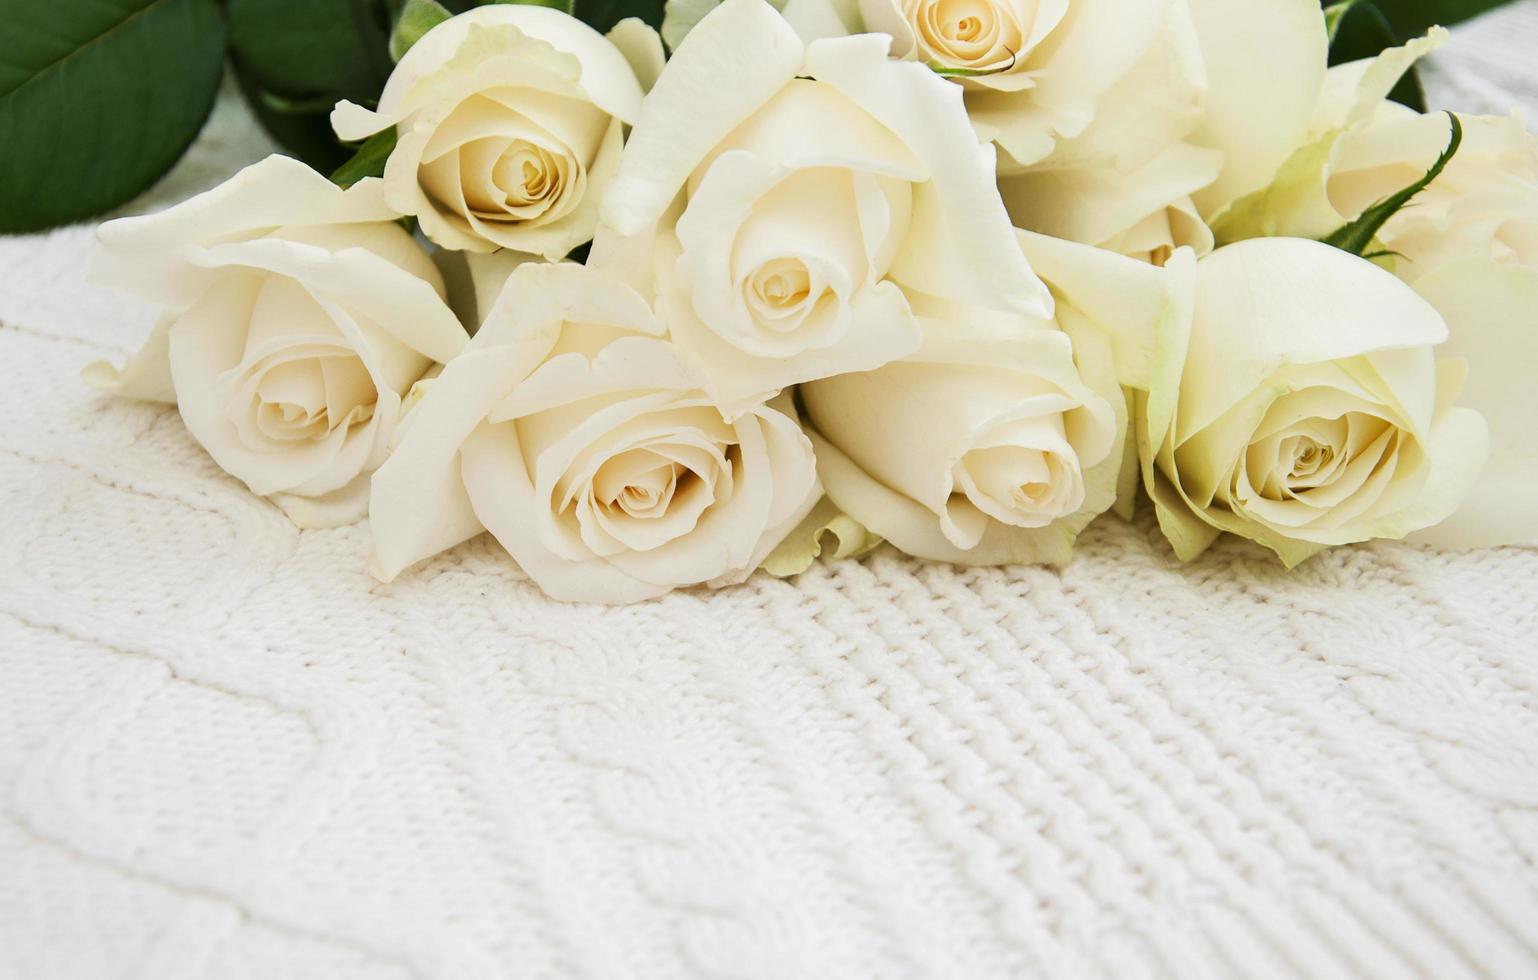 roses on a knitted white background photo